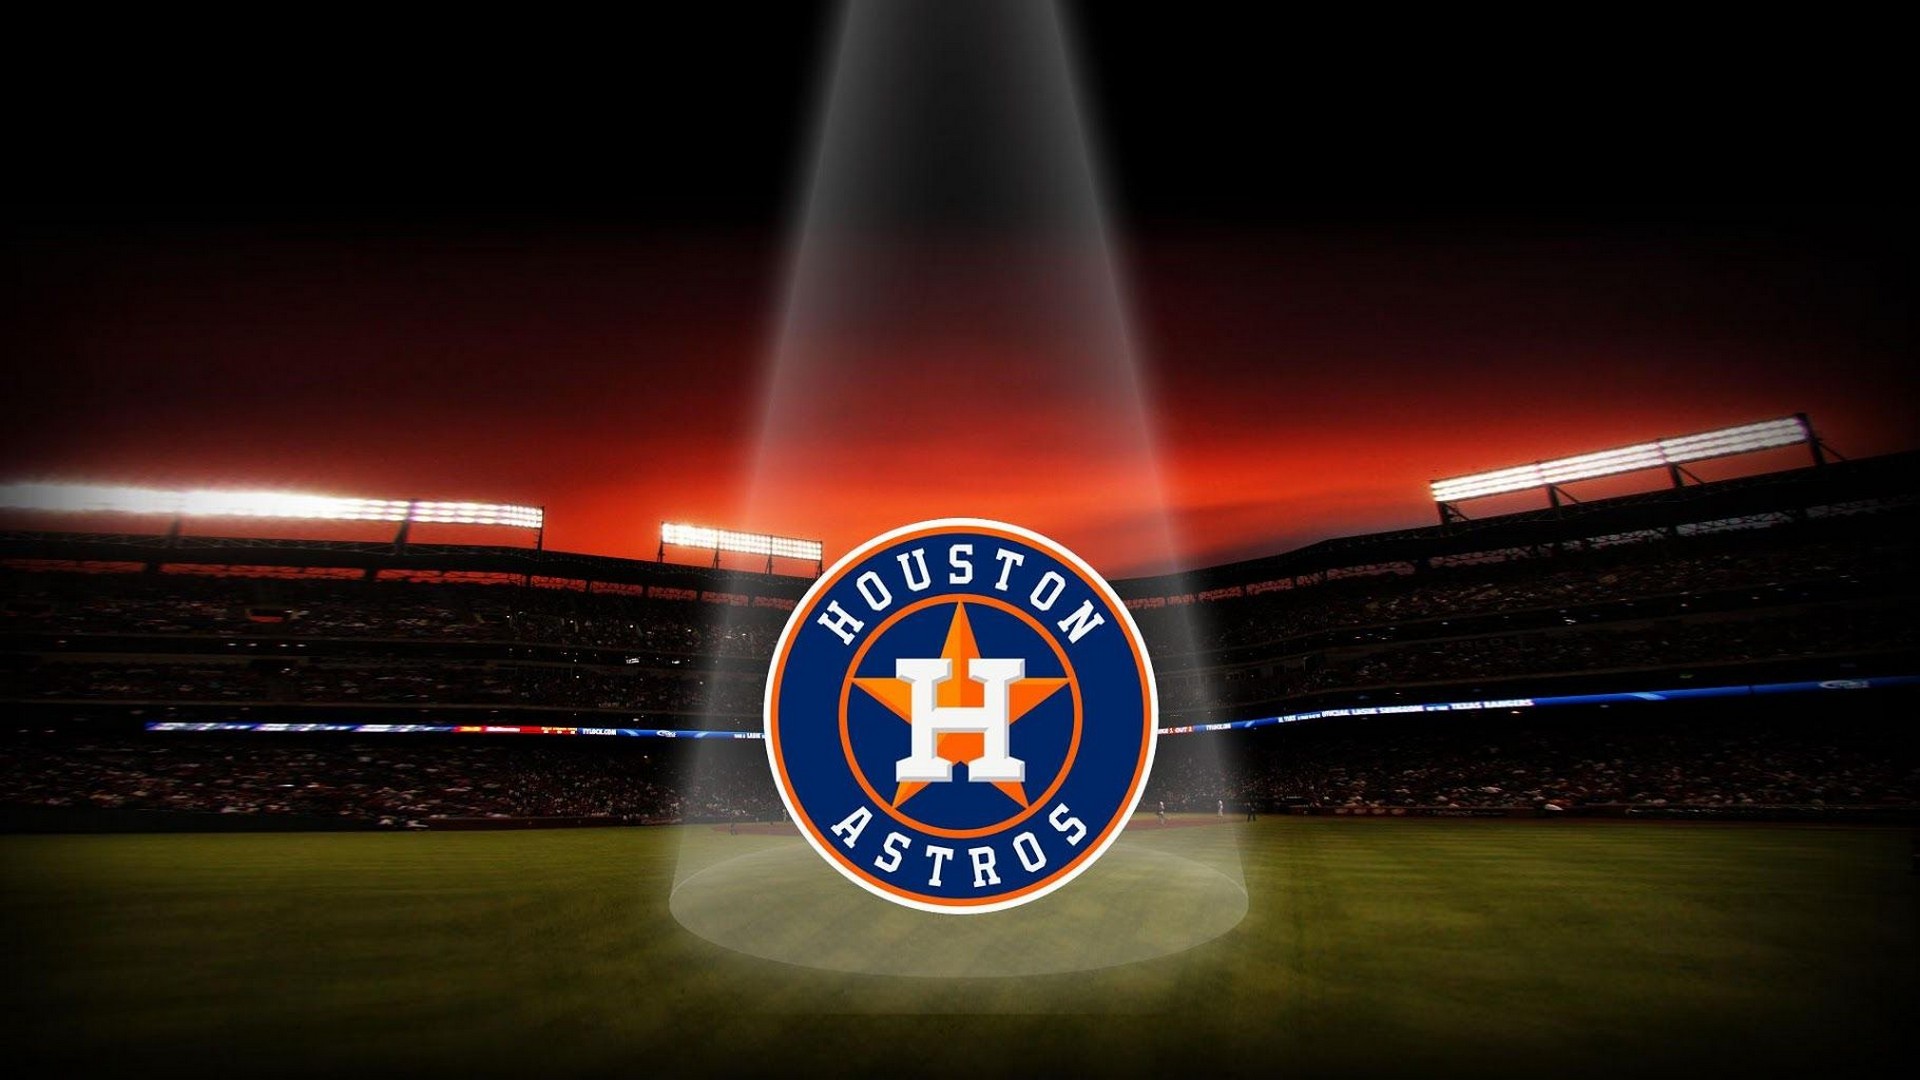 Houston Astros MLB For Desktop Wallpaper With high-resolution 1920X1080 pixel. You can use this wallpaper for Mac Desktop Wallpaper, Laptop Screensavers, Android Wallpapers, Tablet or iPhone Home Screen and another mobile phone device